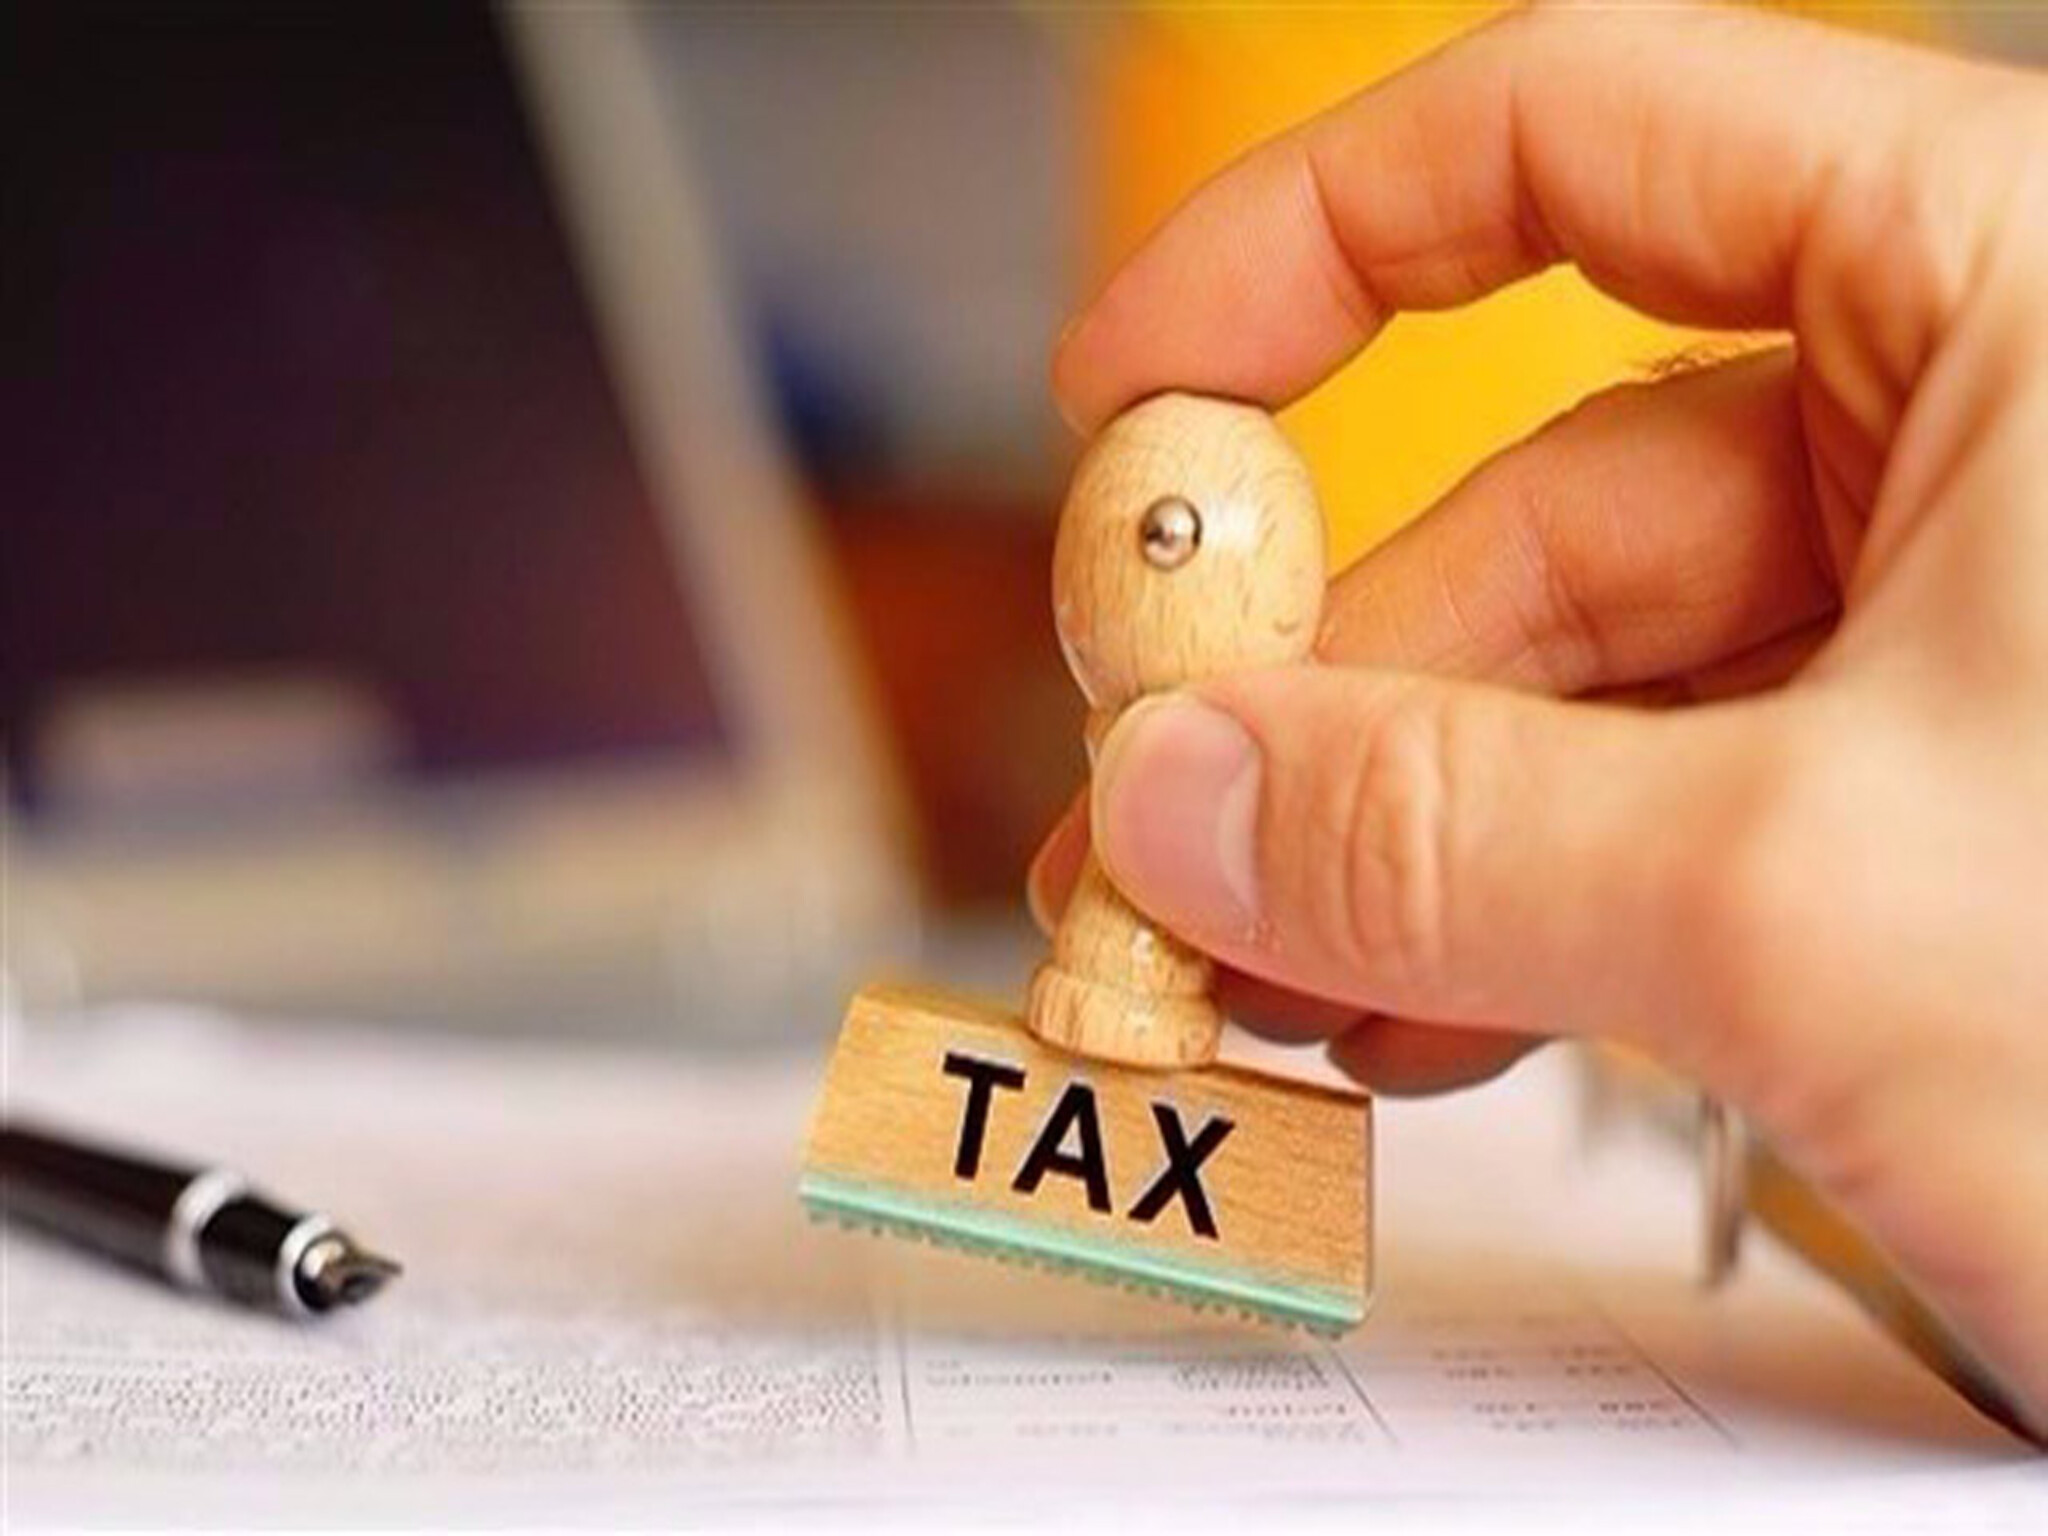 The UAE issues an important decision regarding taxes